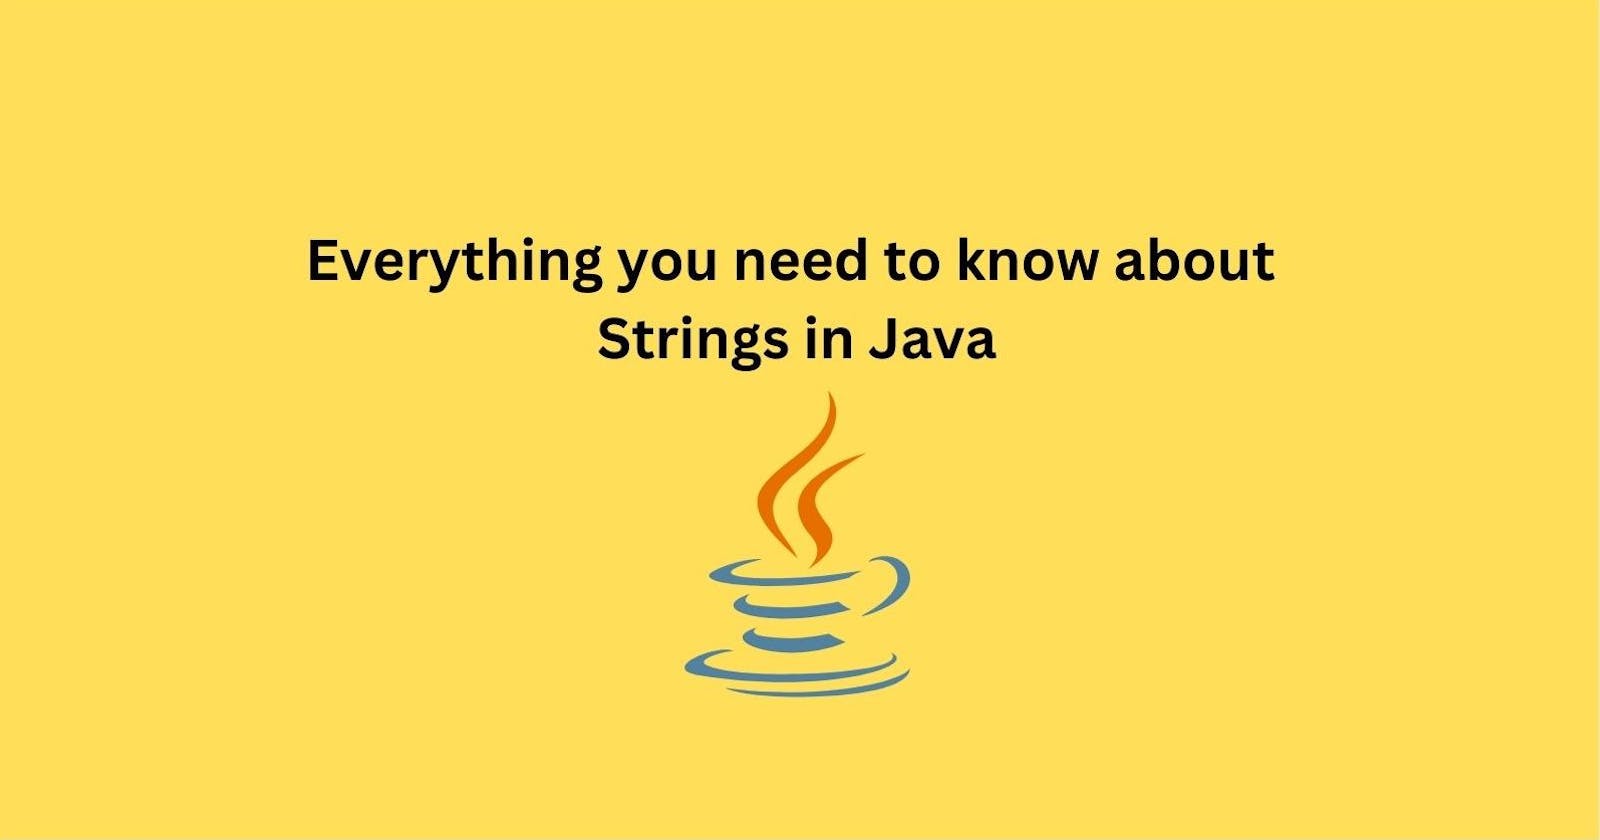 Everything you need to know about "Strings" in Java